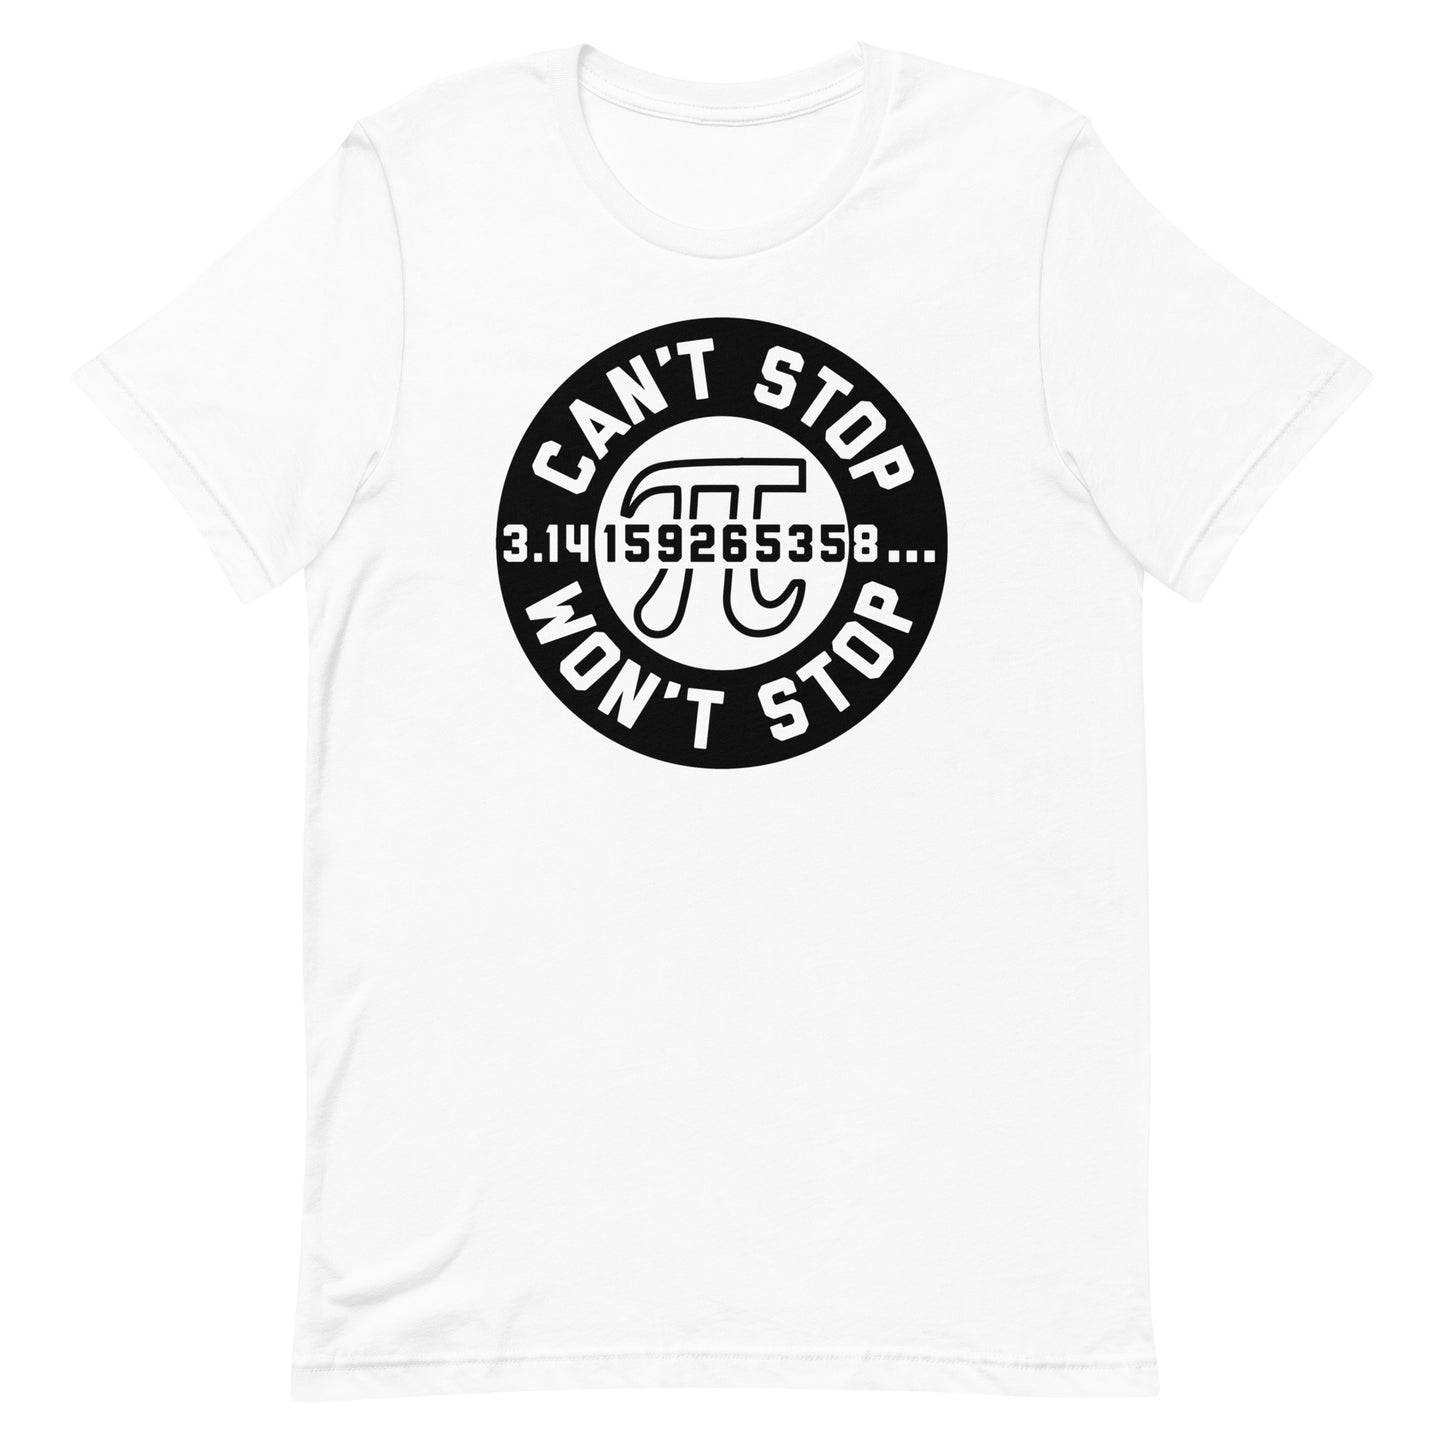 Can't Stop Won't Stop Men's Signature Tee